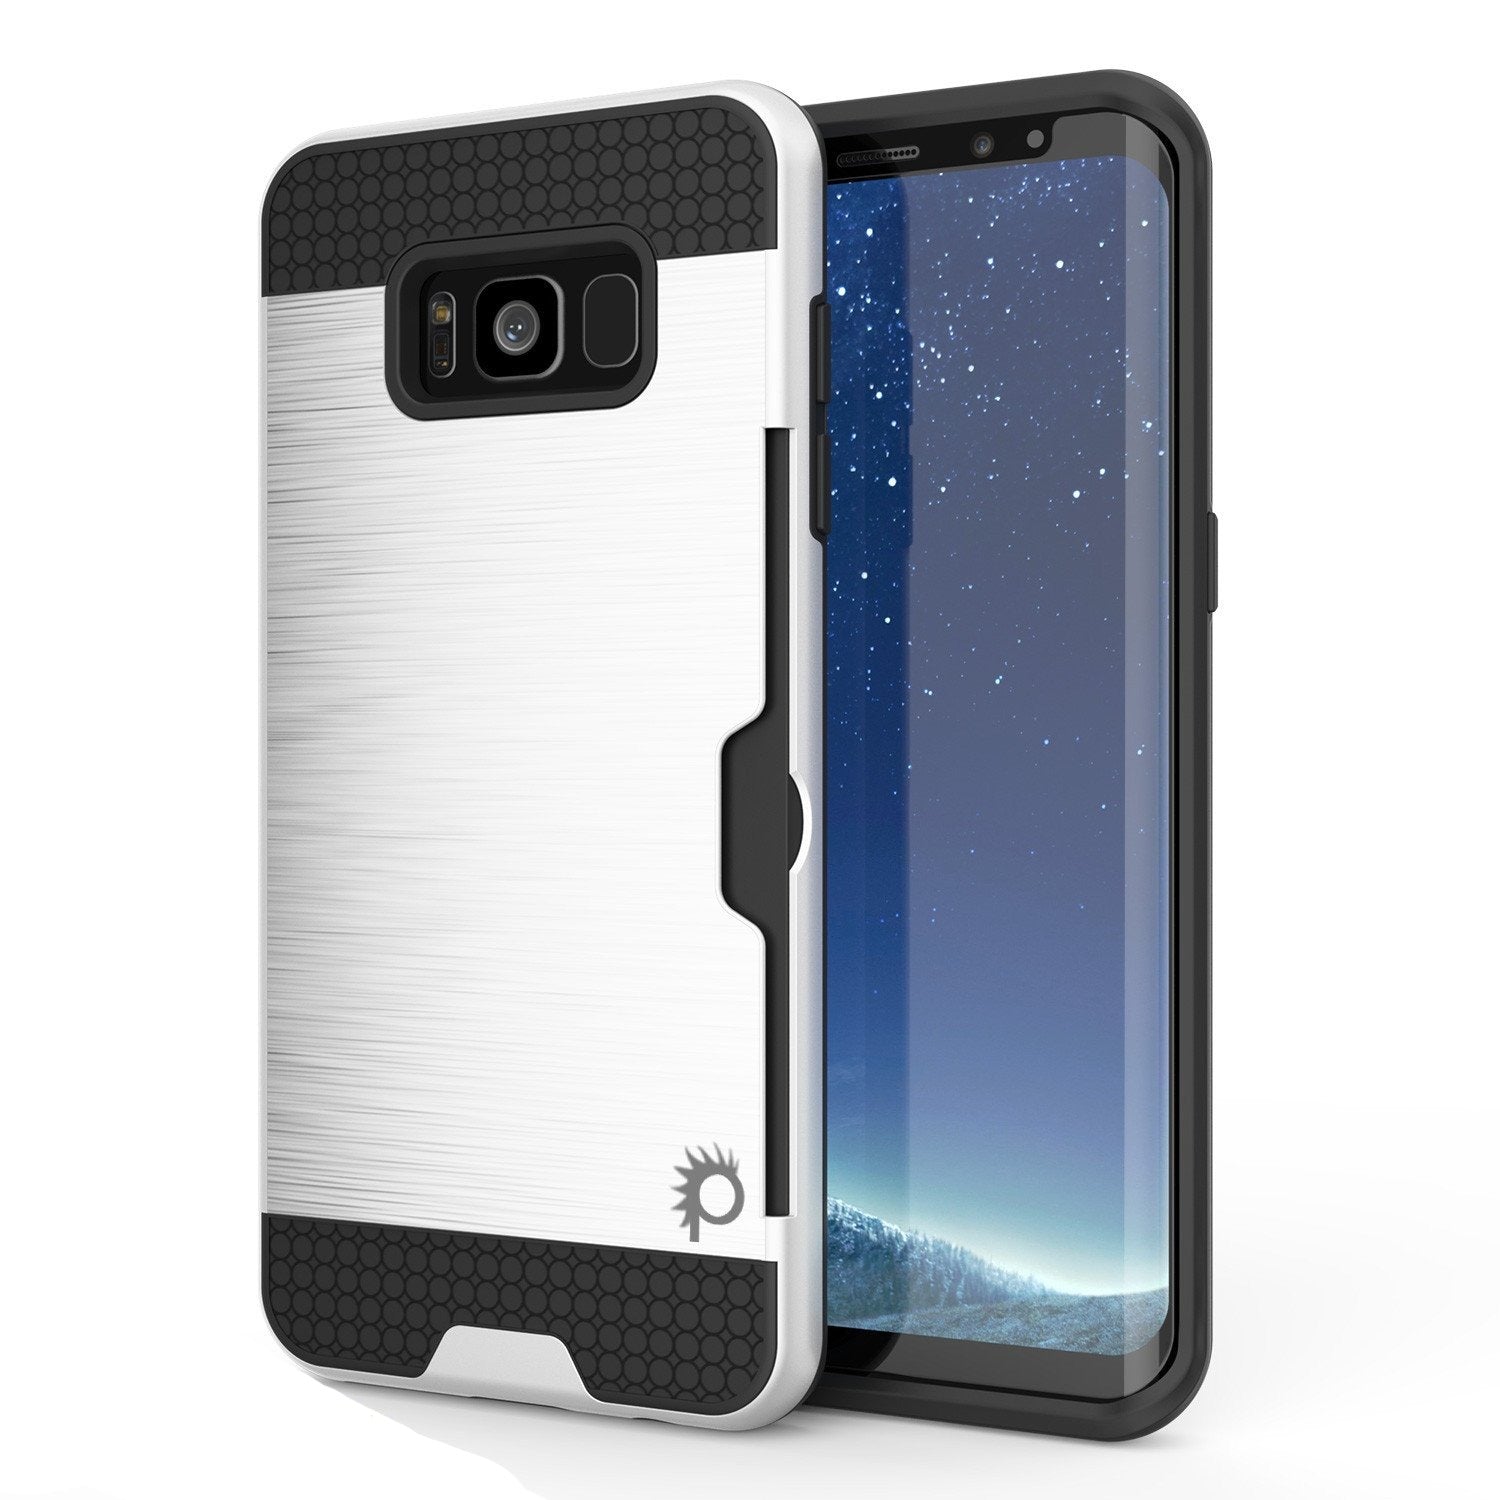 Galaxy S8 Plus Case, PUNKcase [SLOT Series] [Slim Fit] Dual-Layer Armor Cover w/Integrated Anti-Shock System, Credit Card Slot & PunkShield Screen Protector for Samsung Galaxy S8+ [White]